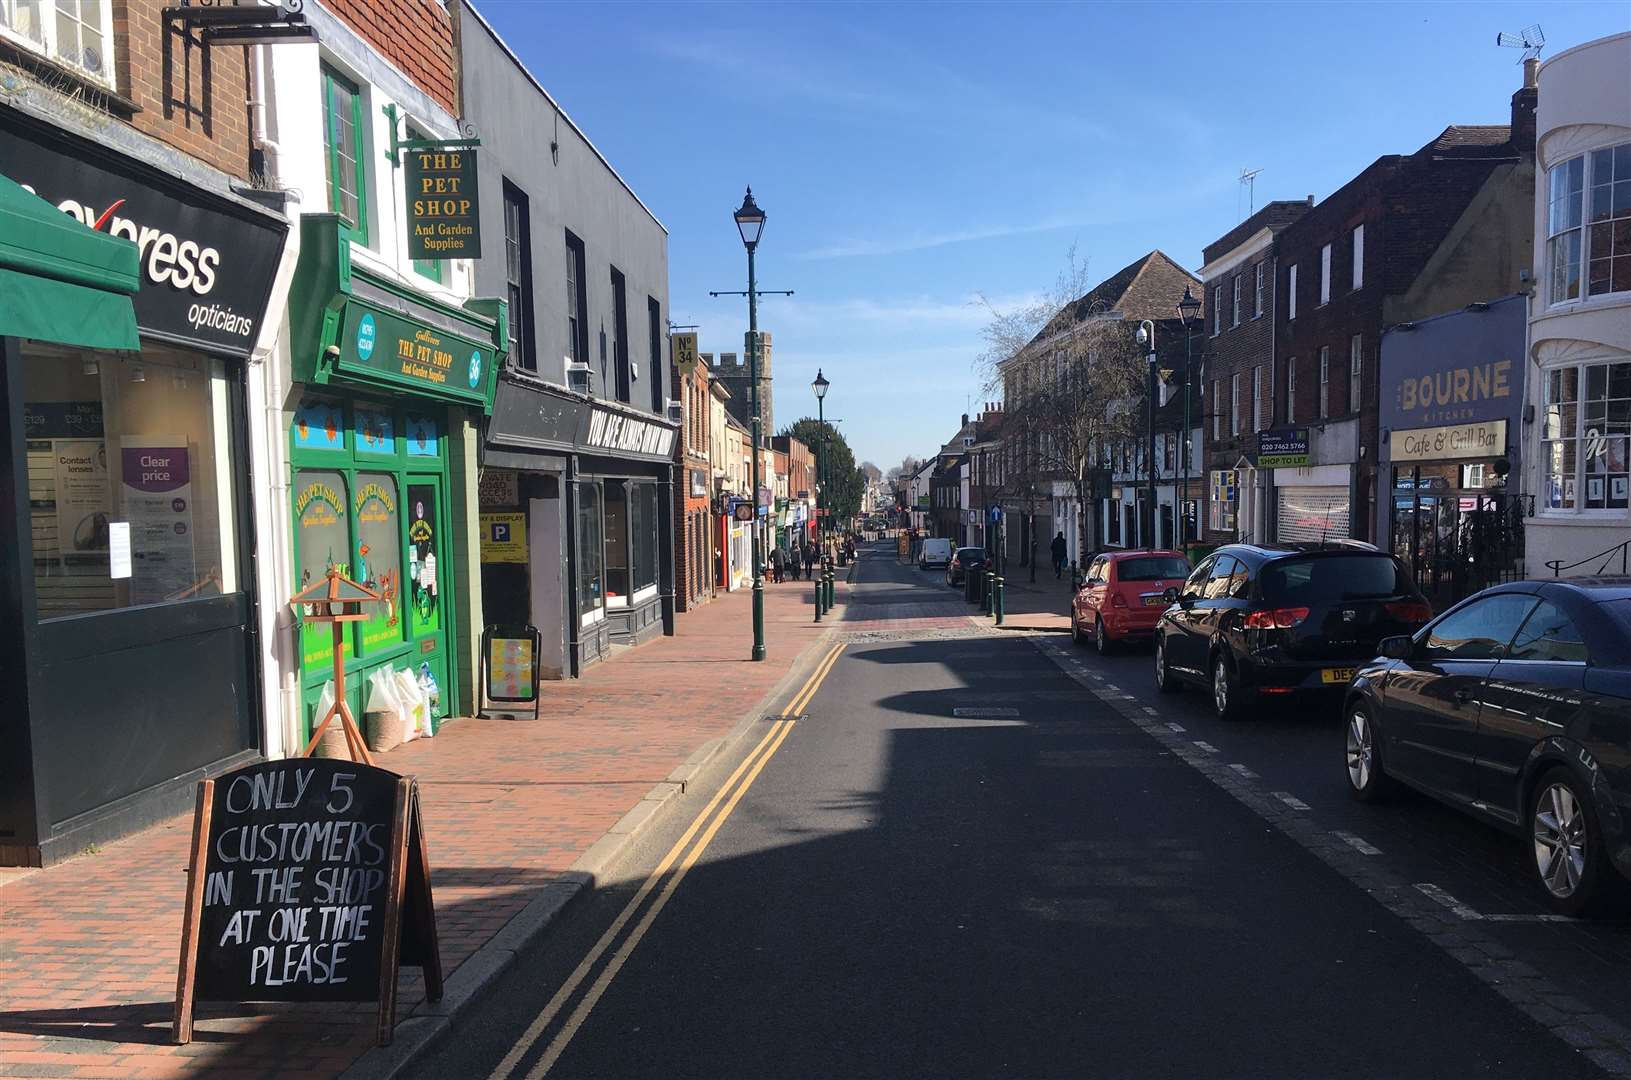 Most people are sticking to the rules, this was Sittingbourne High Street on day one of the lockdown